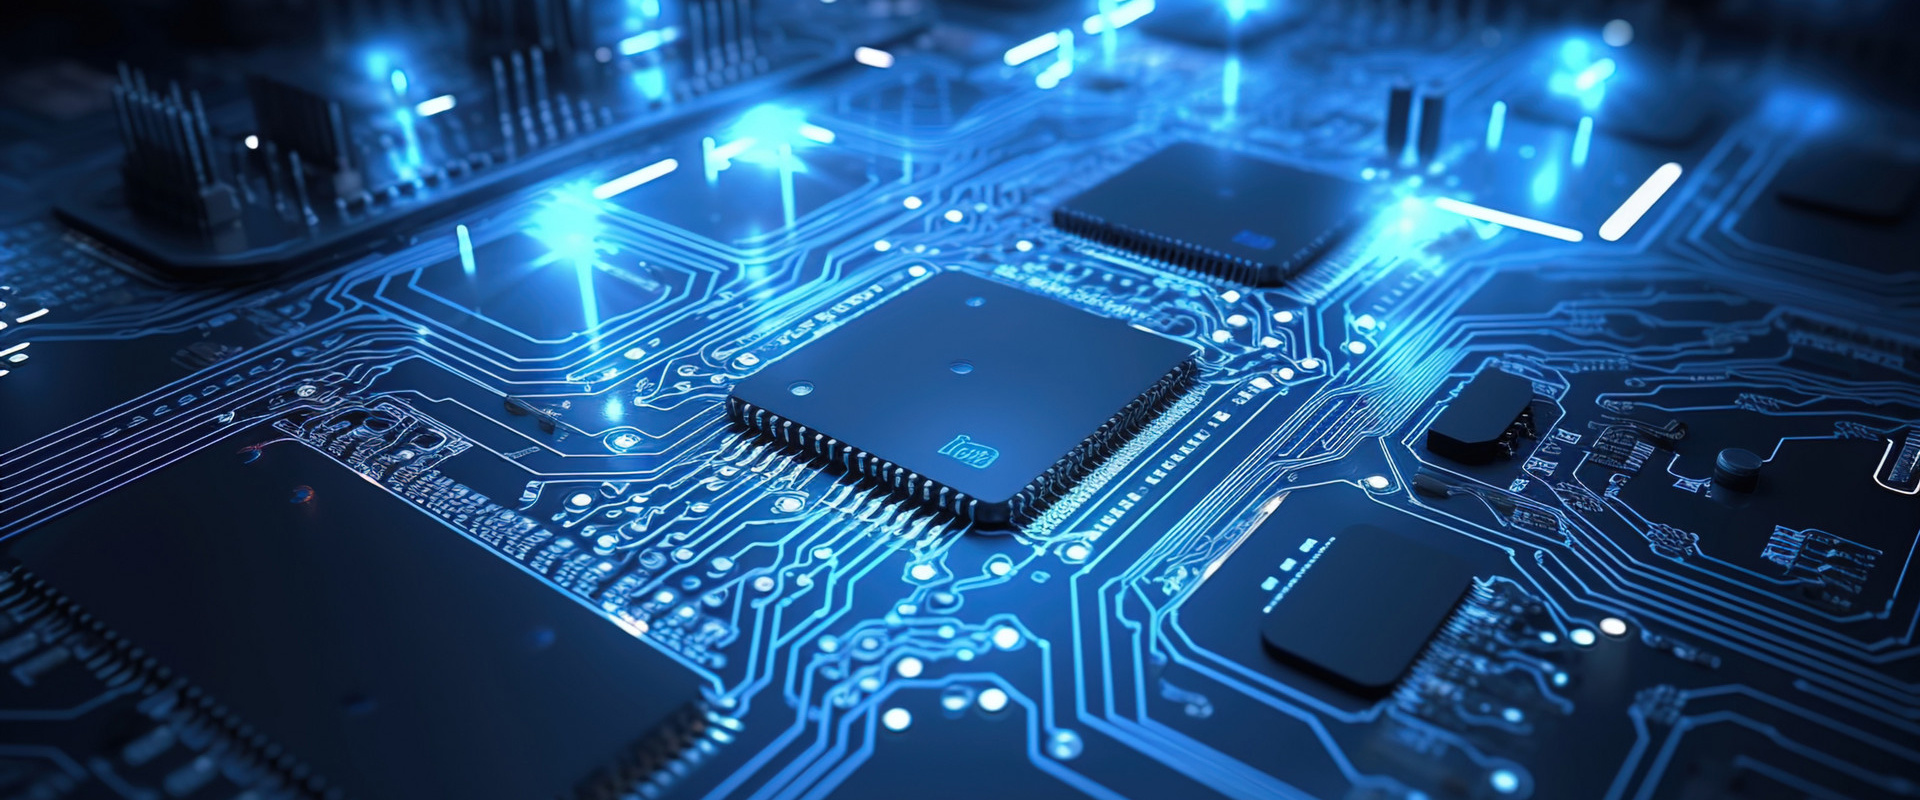 High-end electronics manufacturing applications